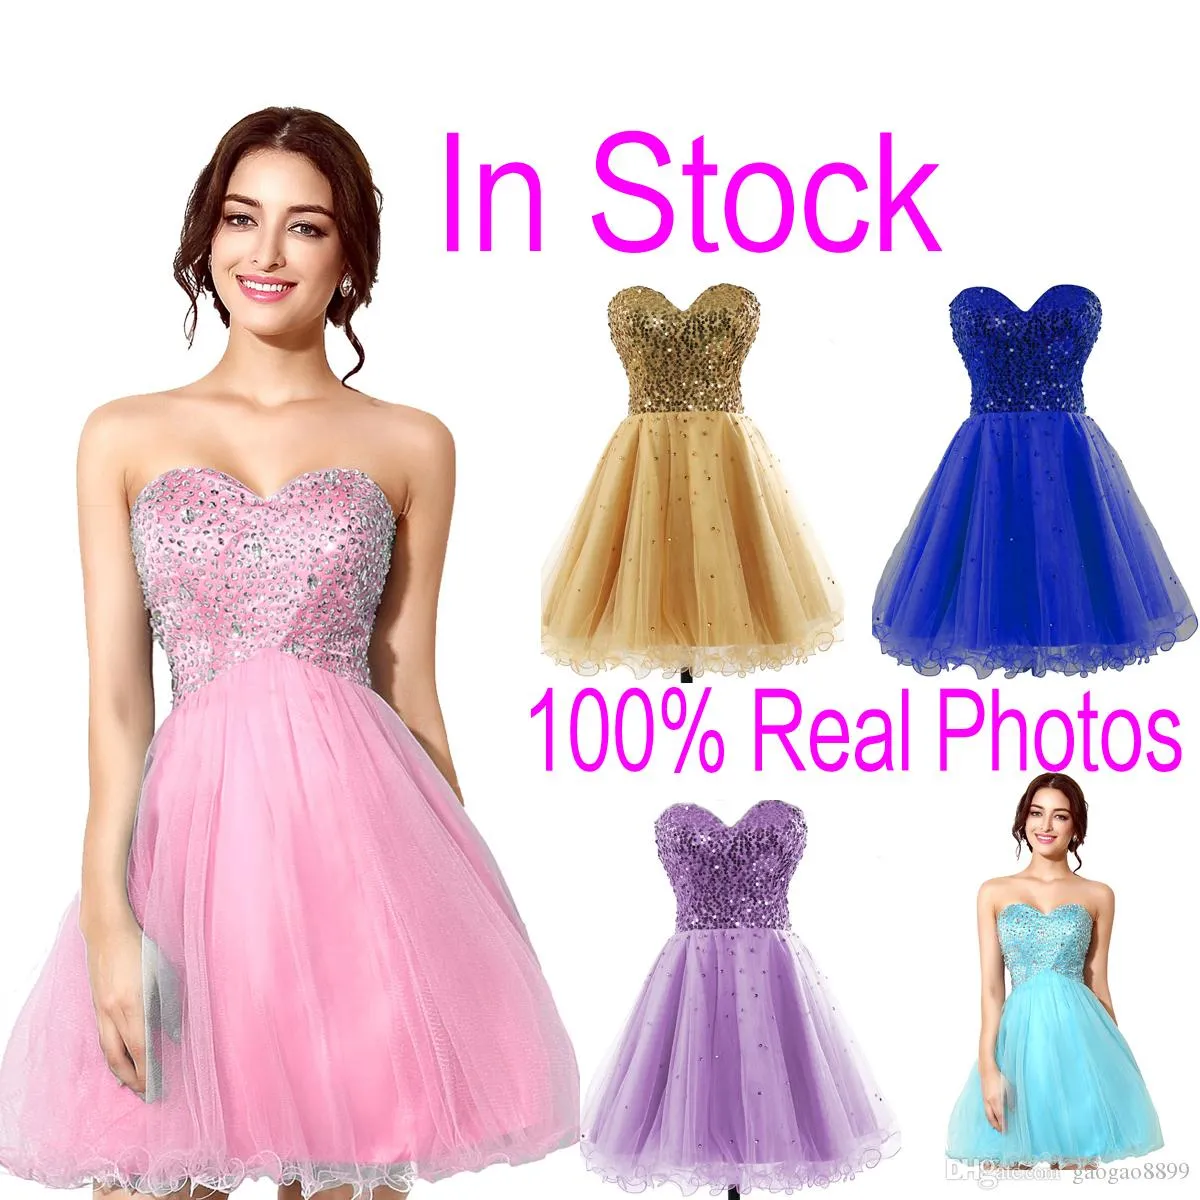 2021 In magazzino Tulle Mini Crystal Cocktail Dresses Beads Short Prom Party Graduation Gowns Immagine reale economica